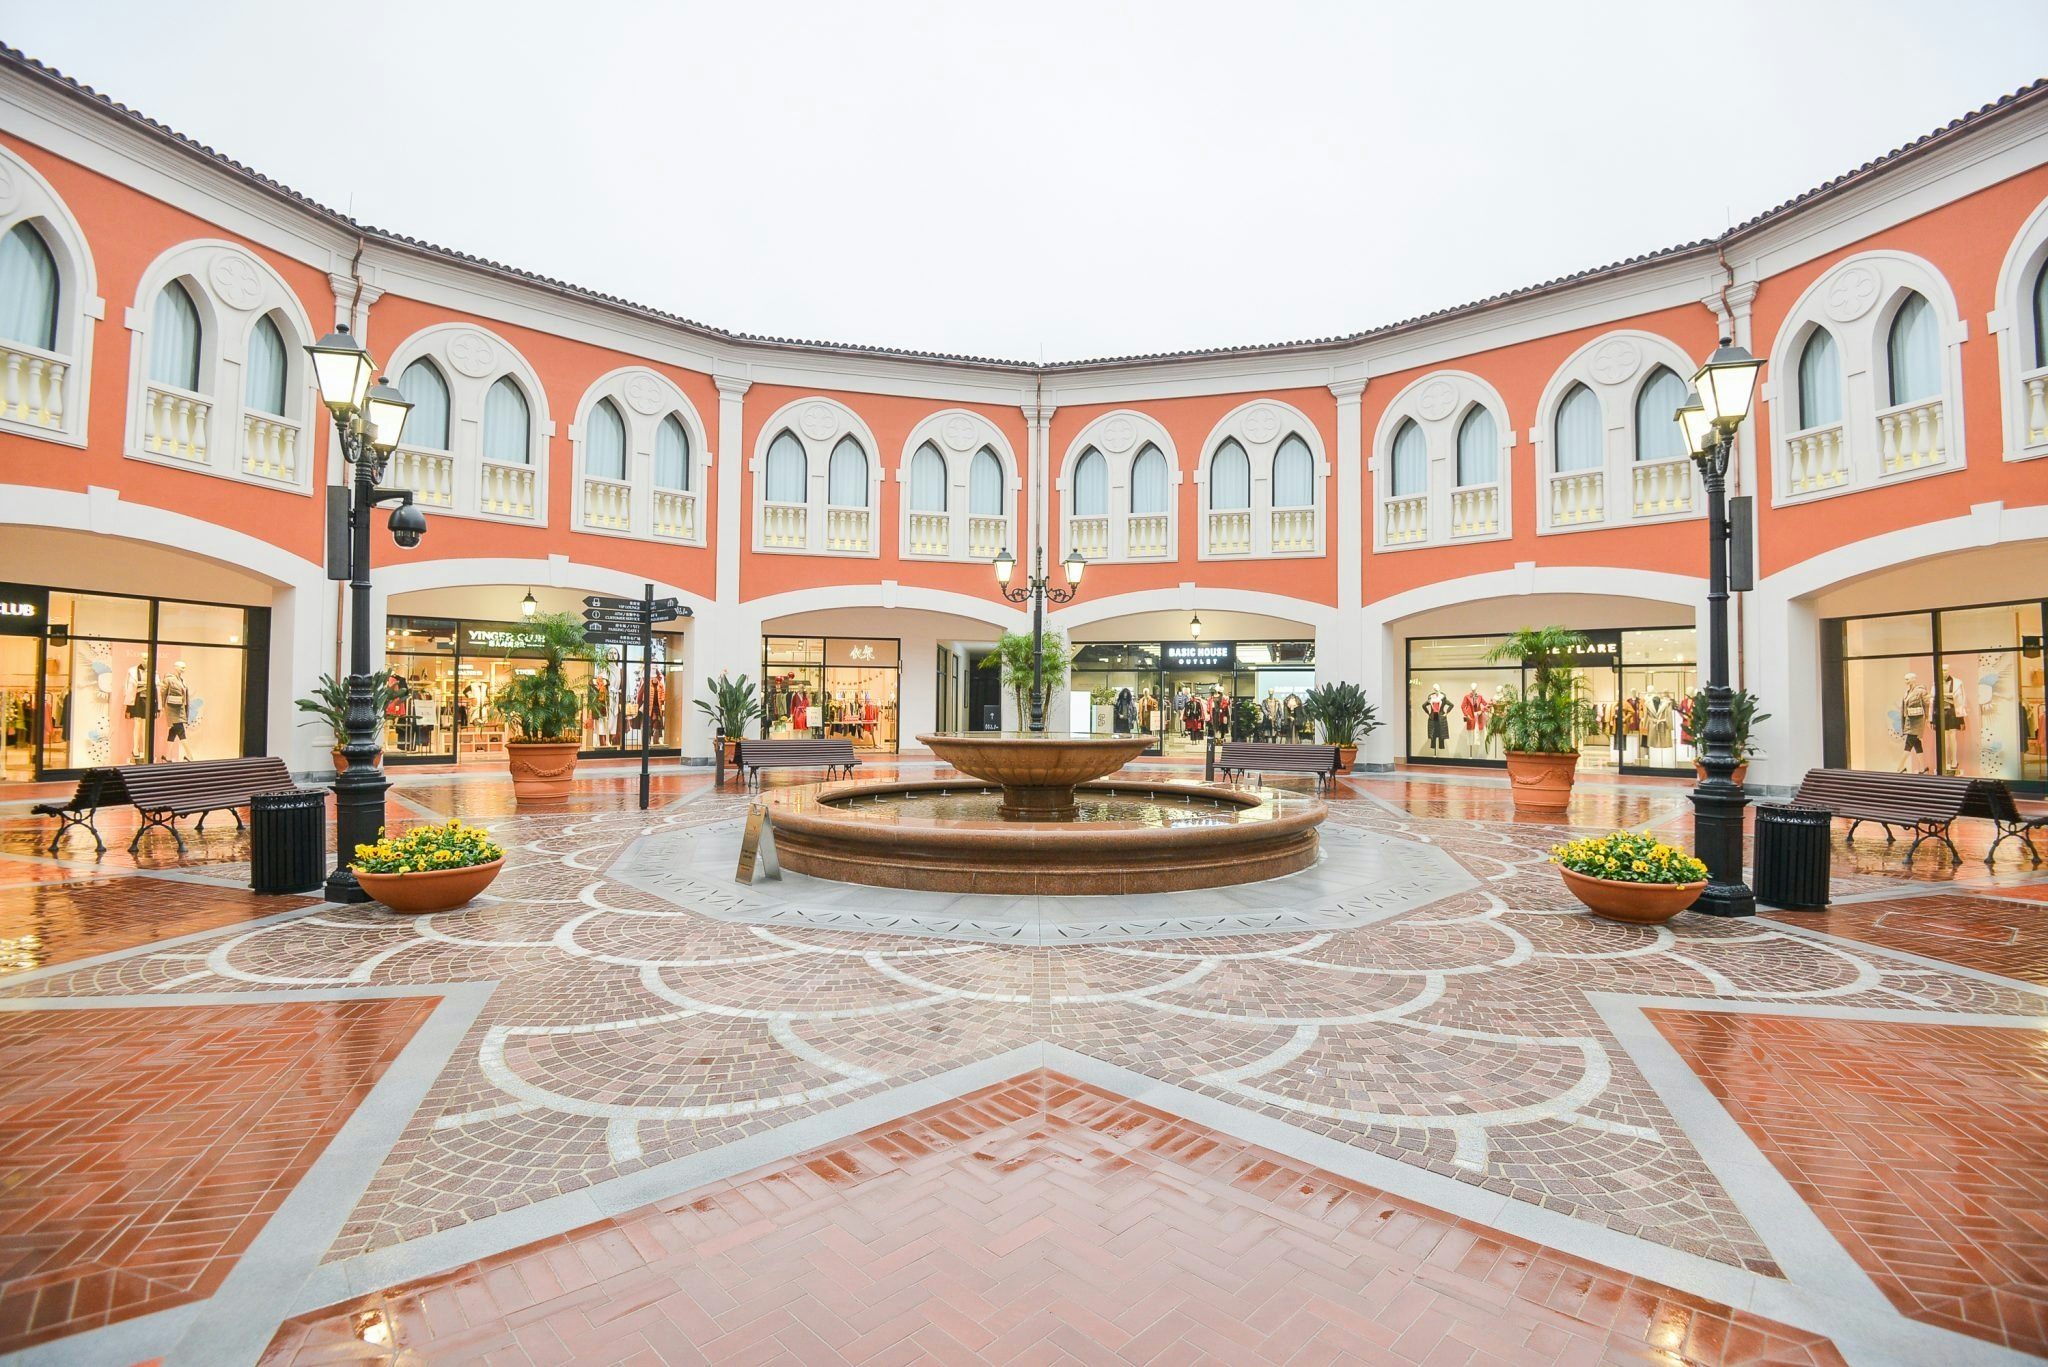 Florentia Village is a Chinese outlet mall for Italian luxury brands. Photo: Florentia Village